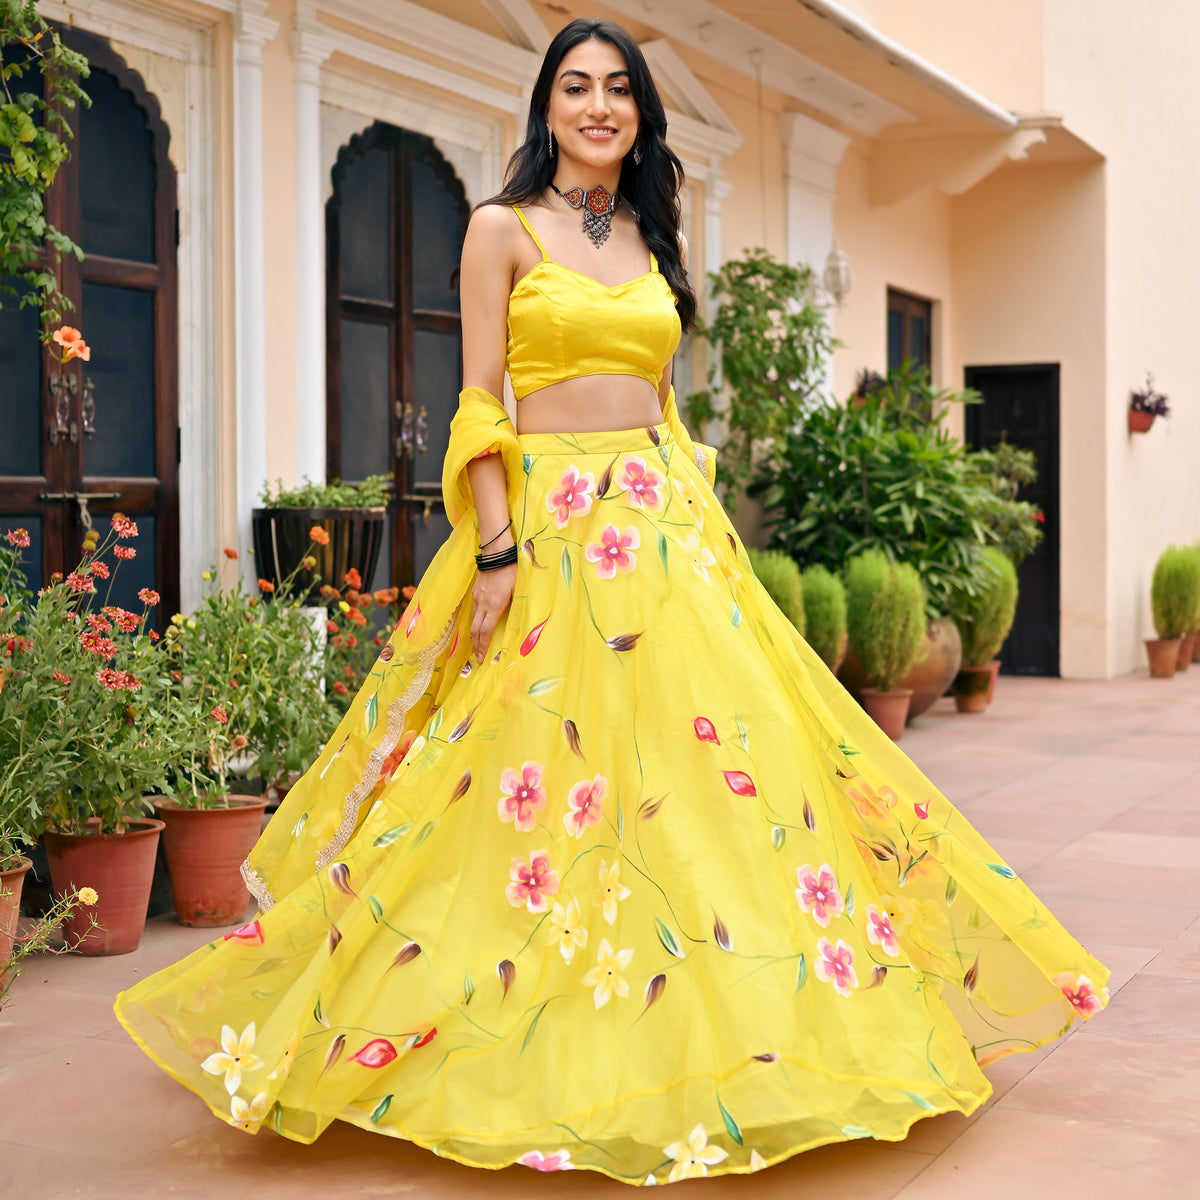 New Arrival Heavy Printed Lehenga Choli For Women at Rs.899/Piece in  lakhimpur offer by shri bankey bihari online shopping site